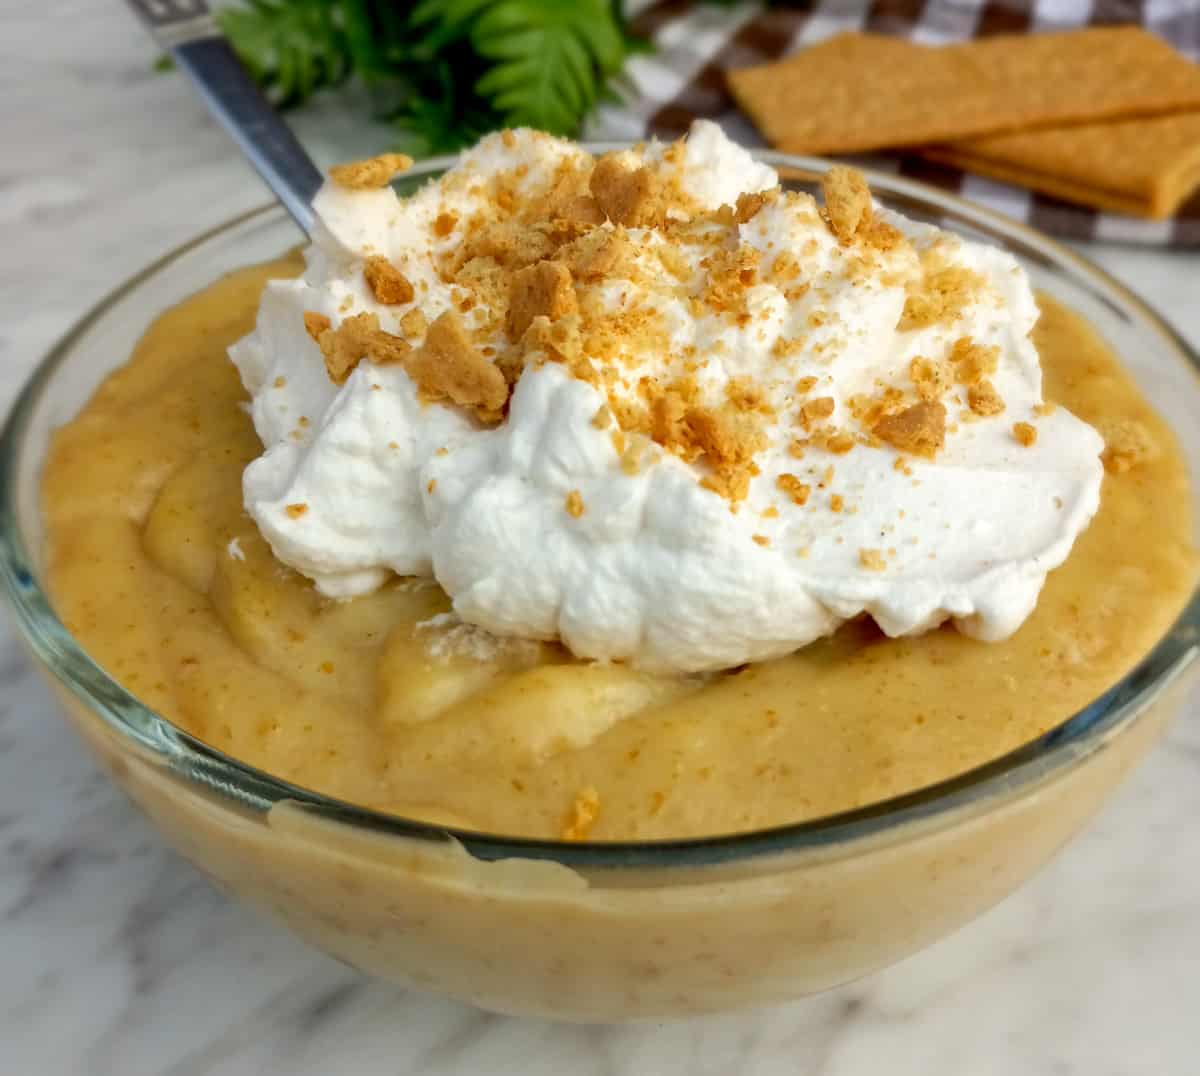 bowl-of-Amish-graham-cracker-pudding-topped-with-whipped-cream-and-cracker-crumbs-